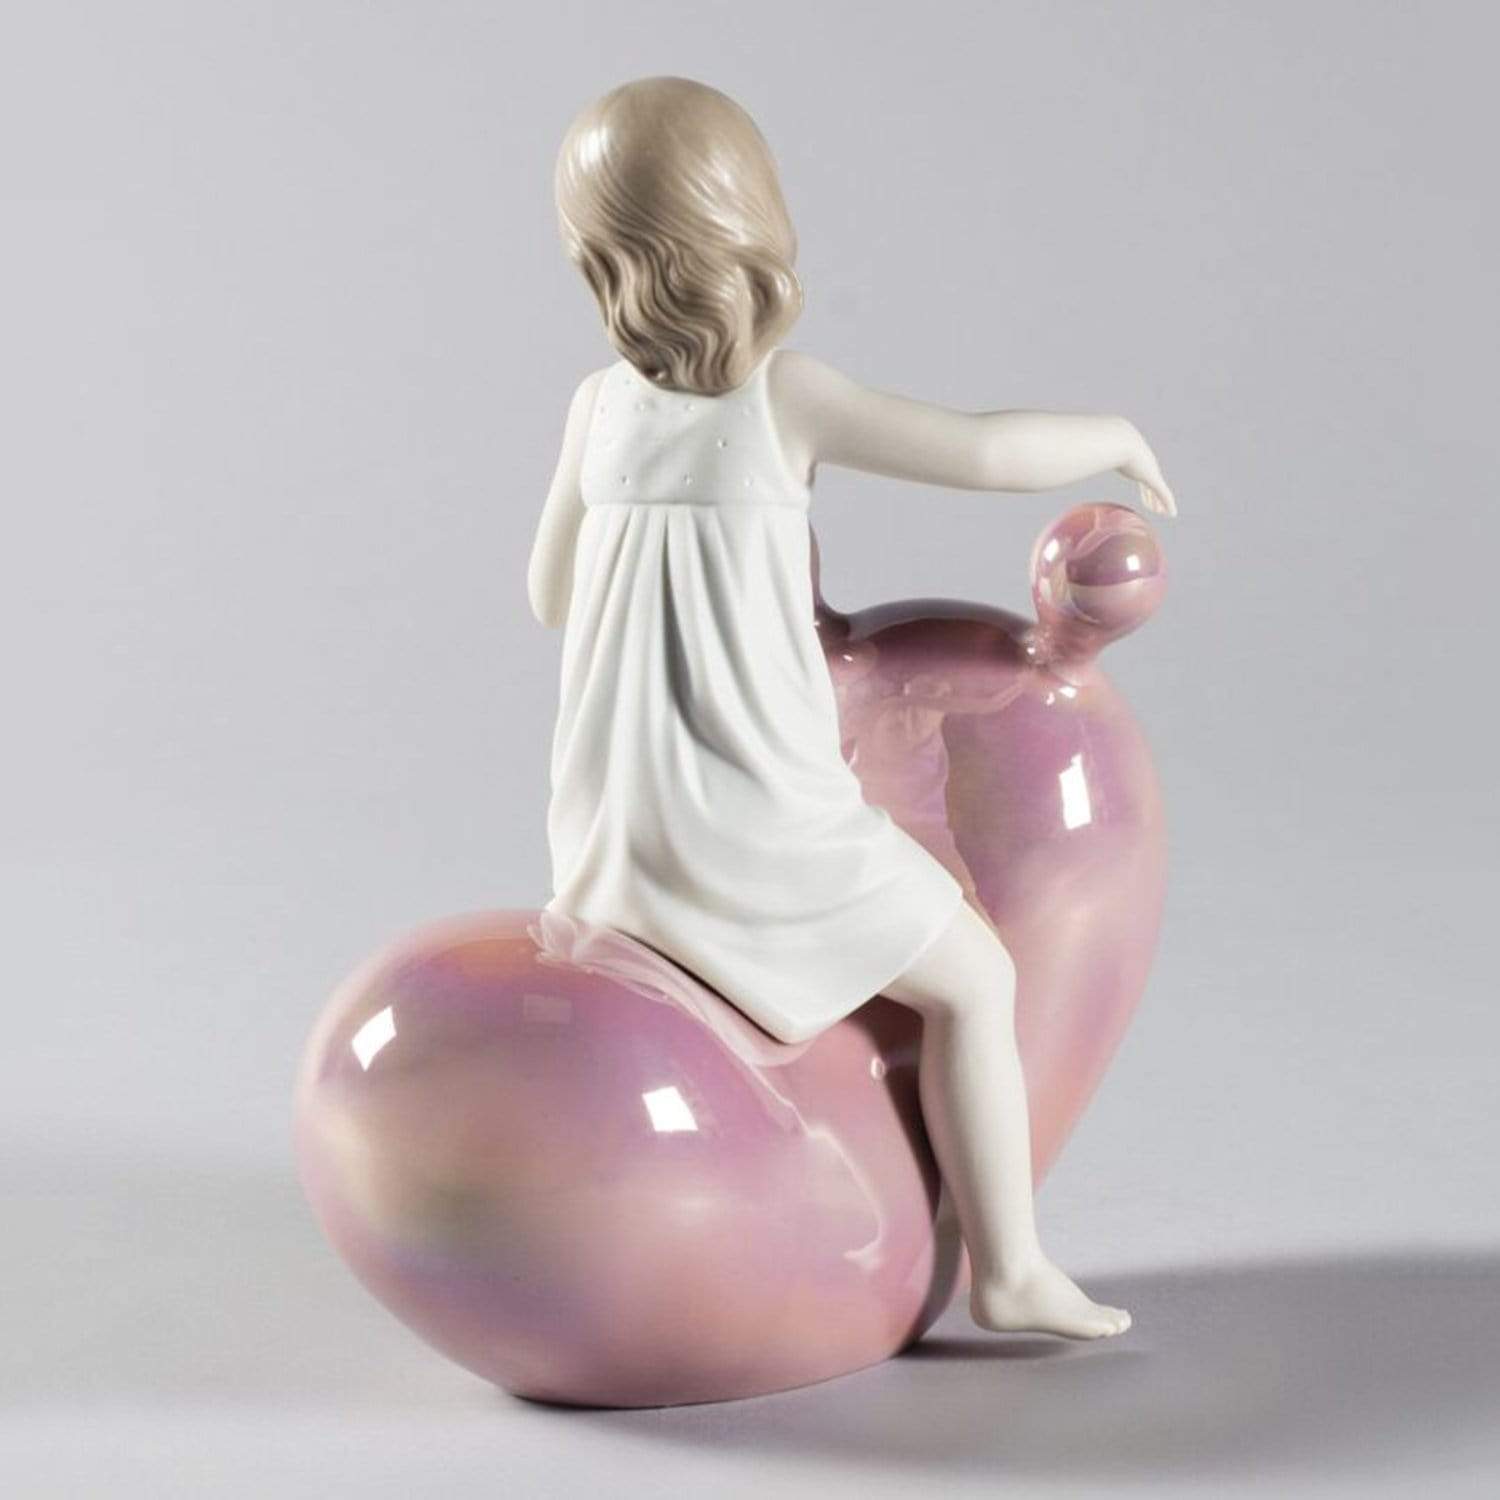 Lladro My Seesaw Balloon Girl Figurine - Pink and White - 1009367 - Jashanmal Home